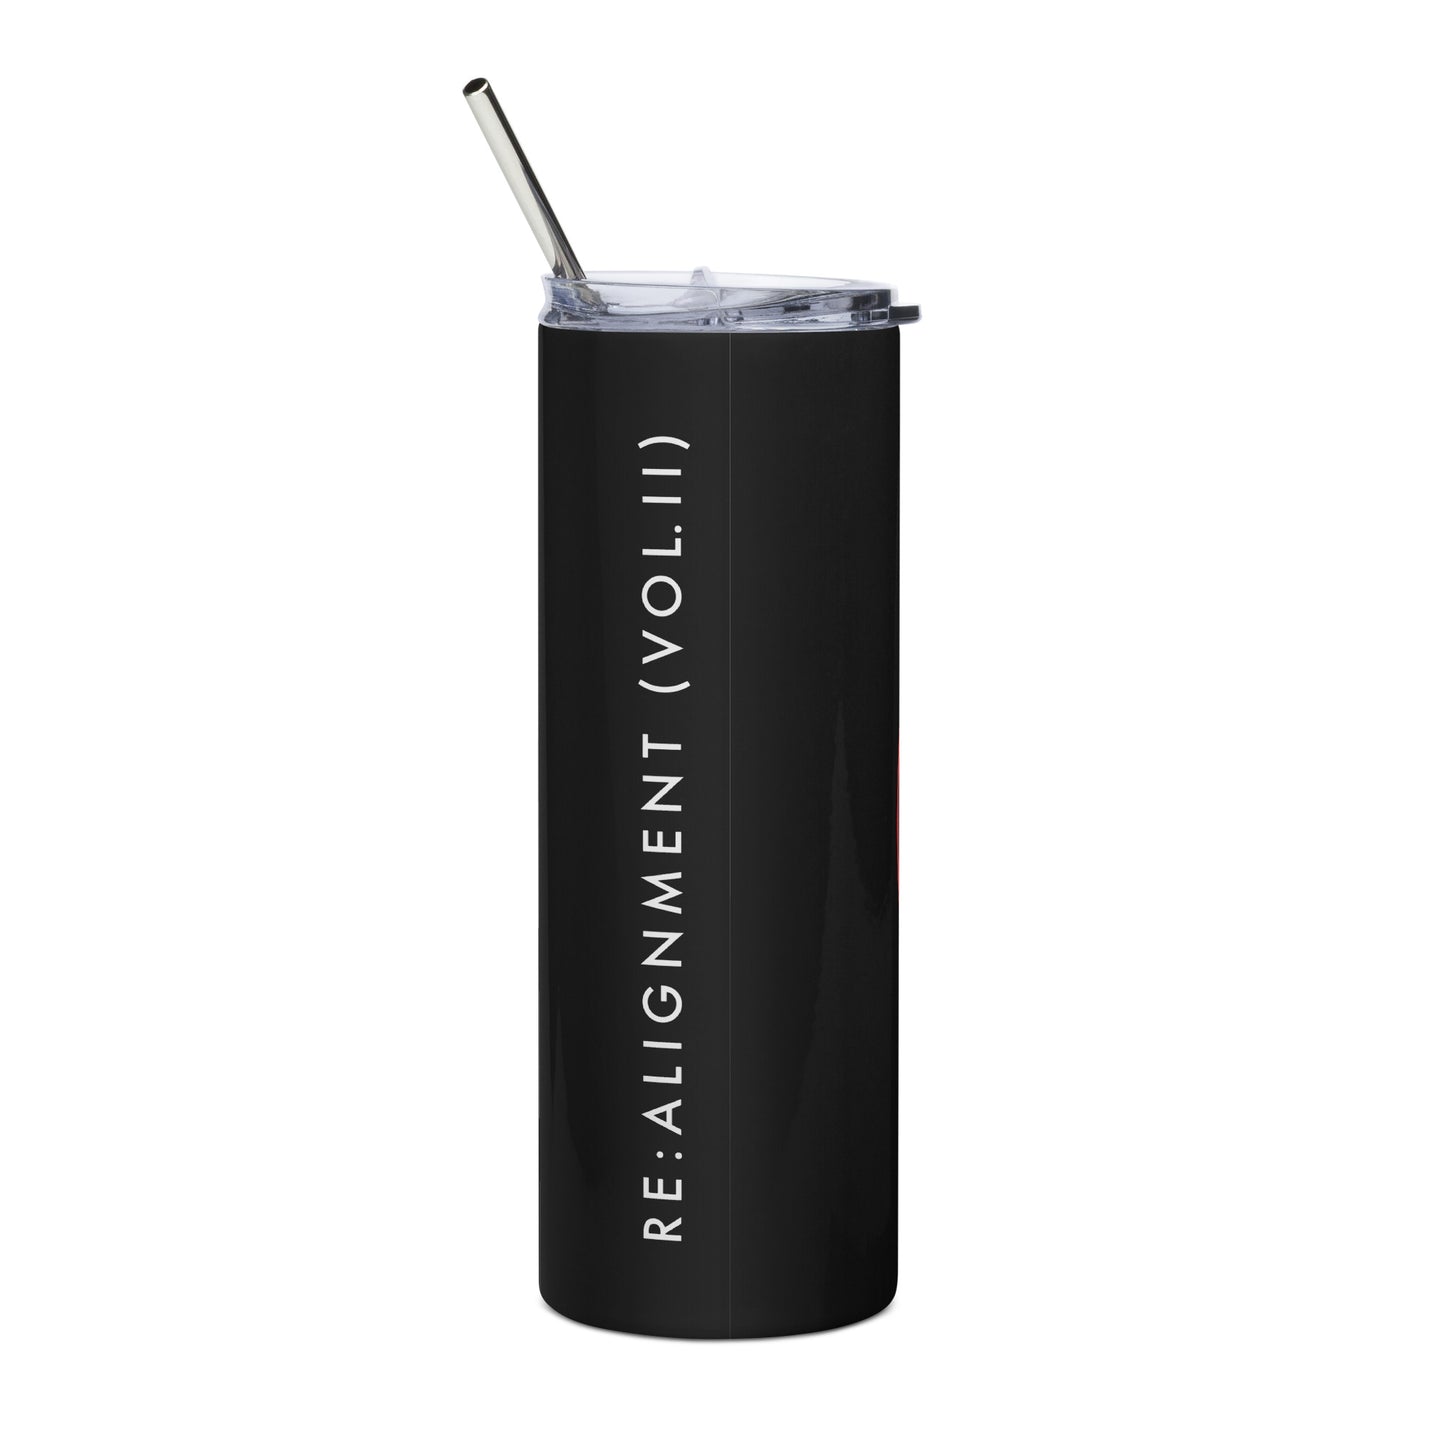 RE:ALIGNMENT Stainless steel tumbler